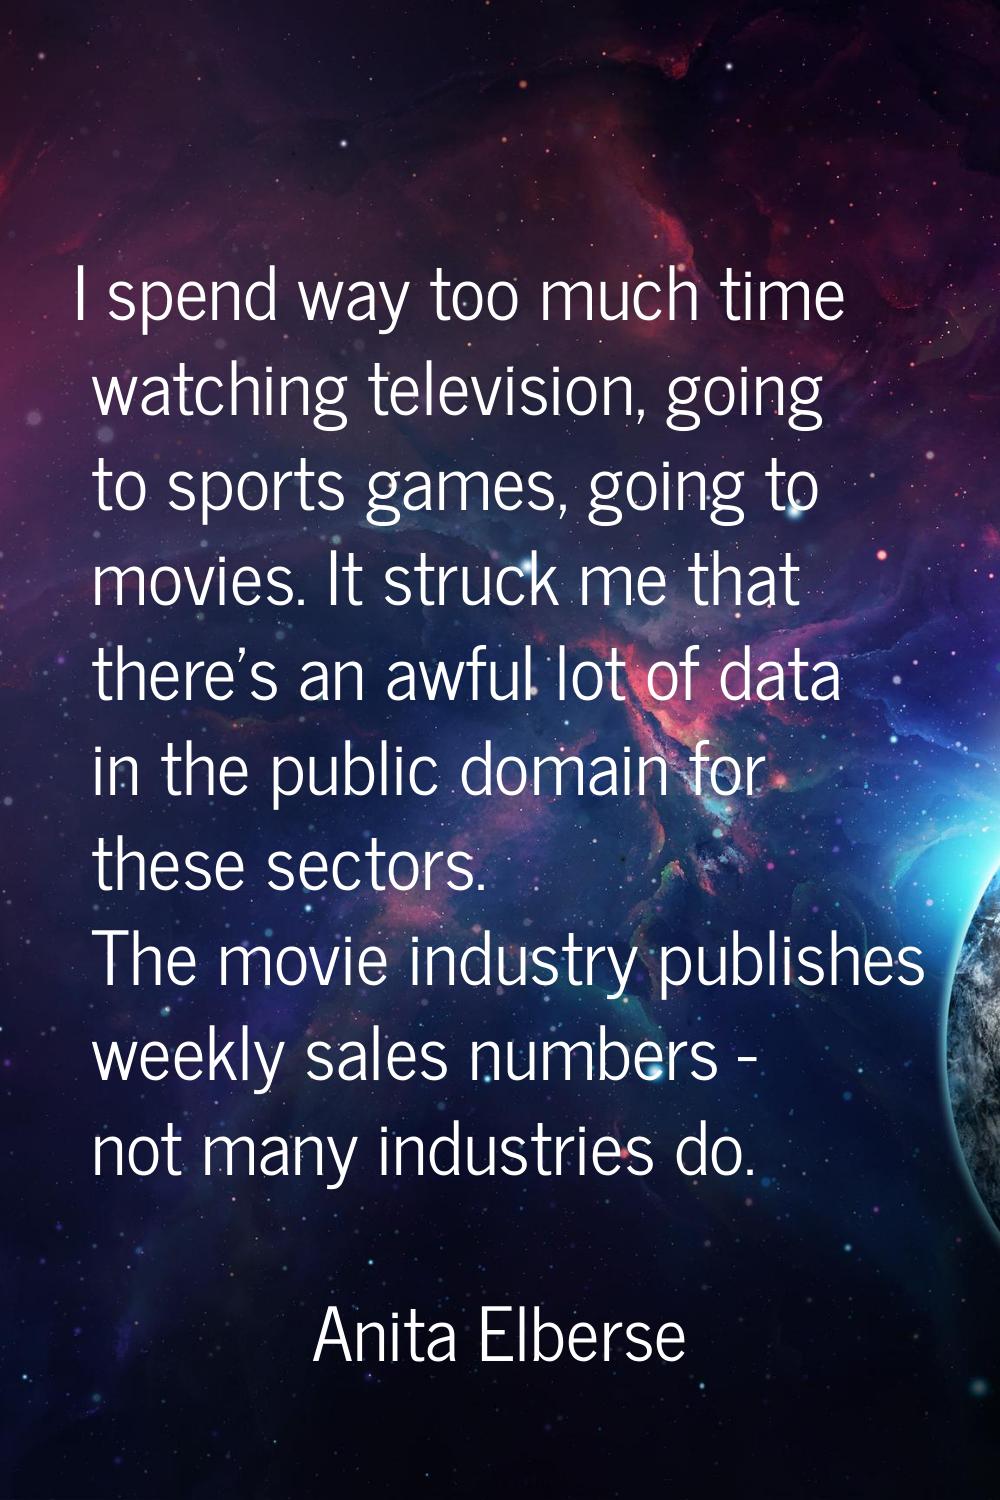 I spend way too much time watching television, going to sports games, going to movies. It struck me